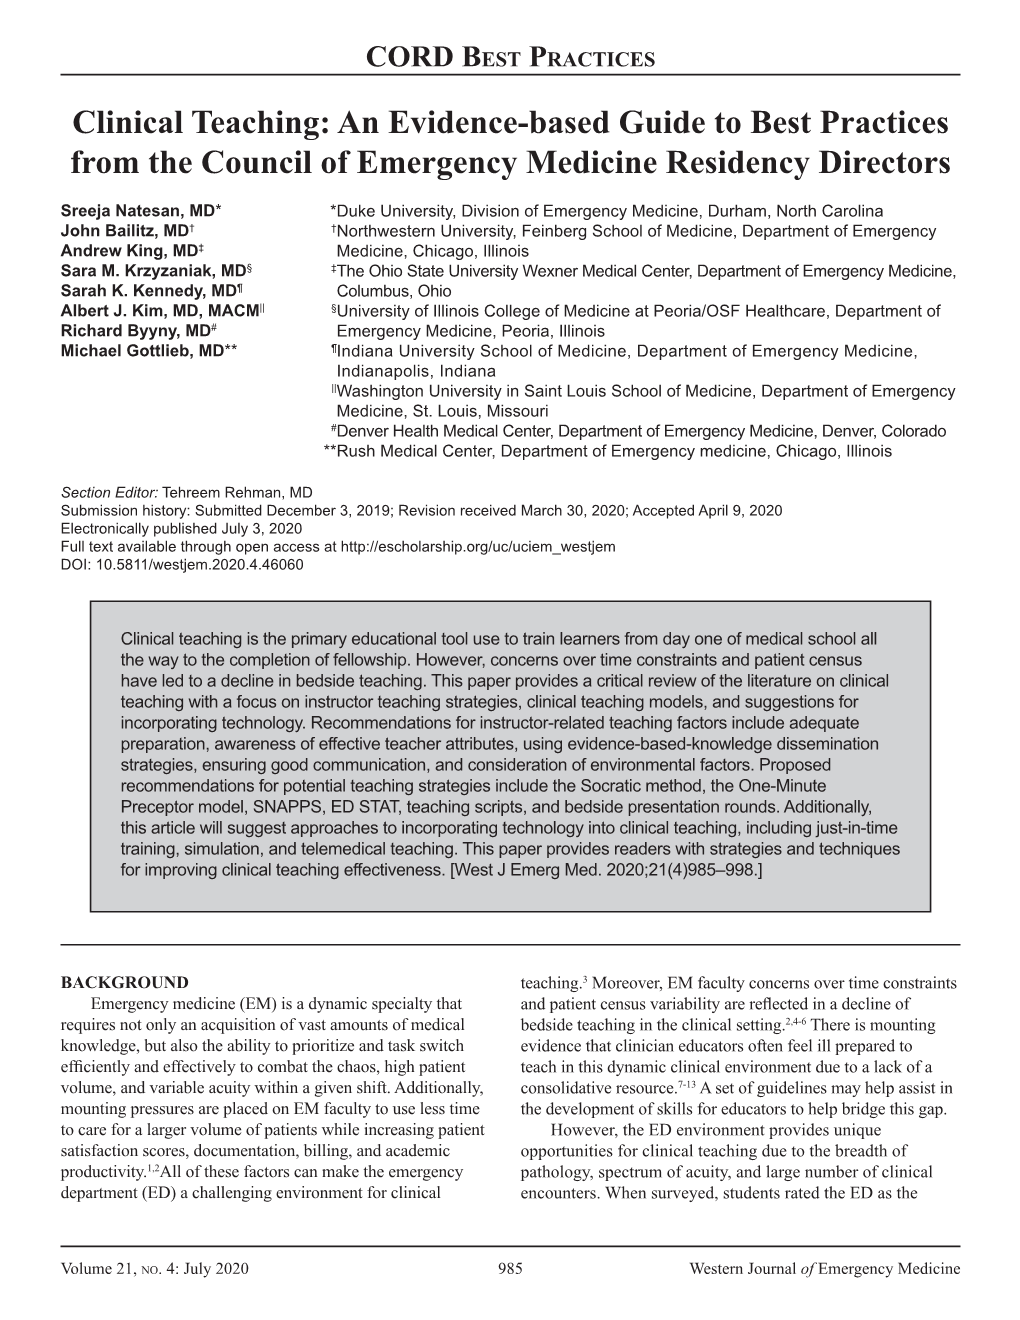 Clinical Teaching: an Evidence-Based Guide to Best Practices from the Council of Emergency Medicine Residency Directors